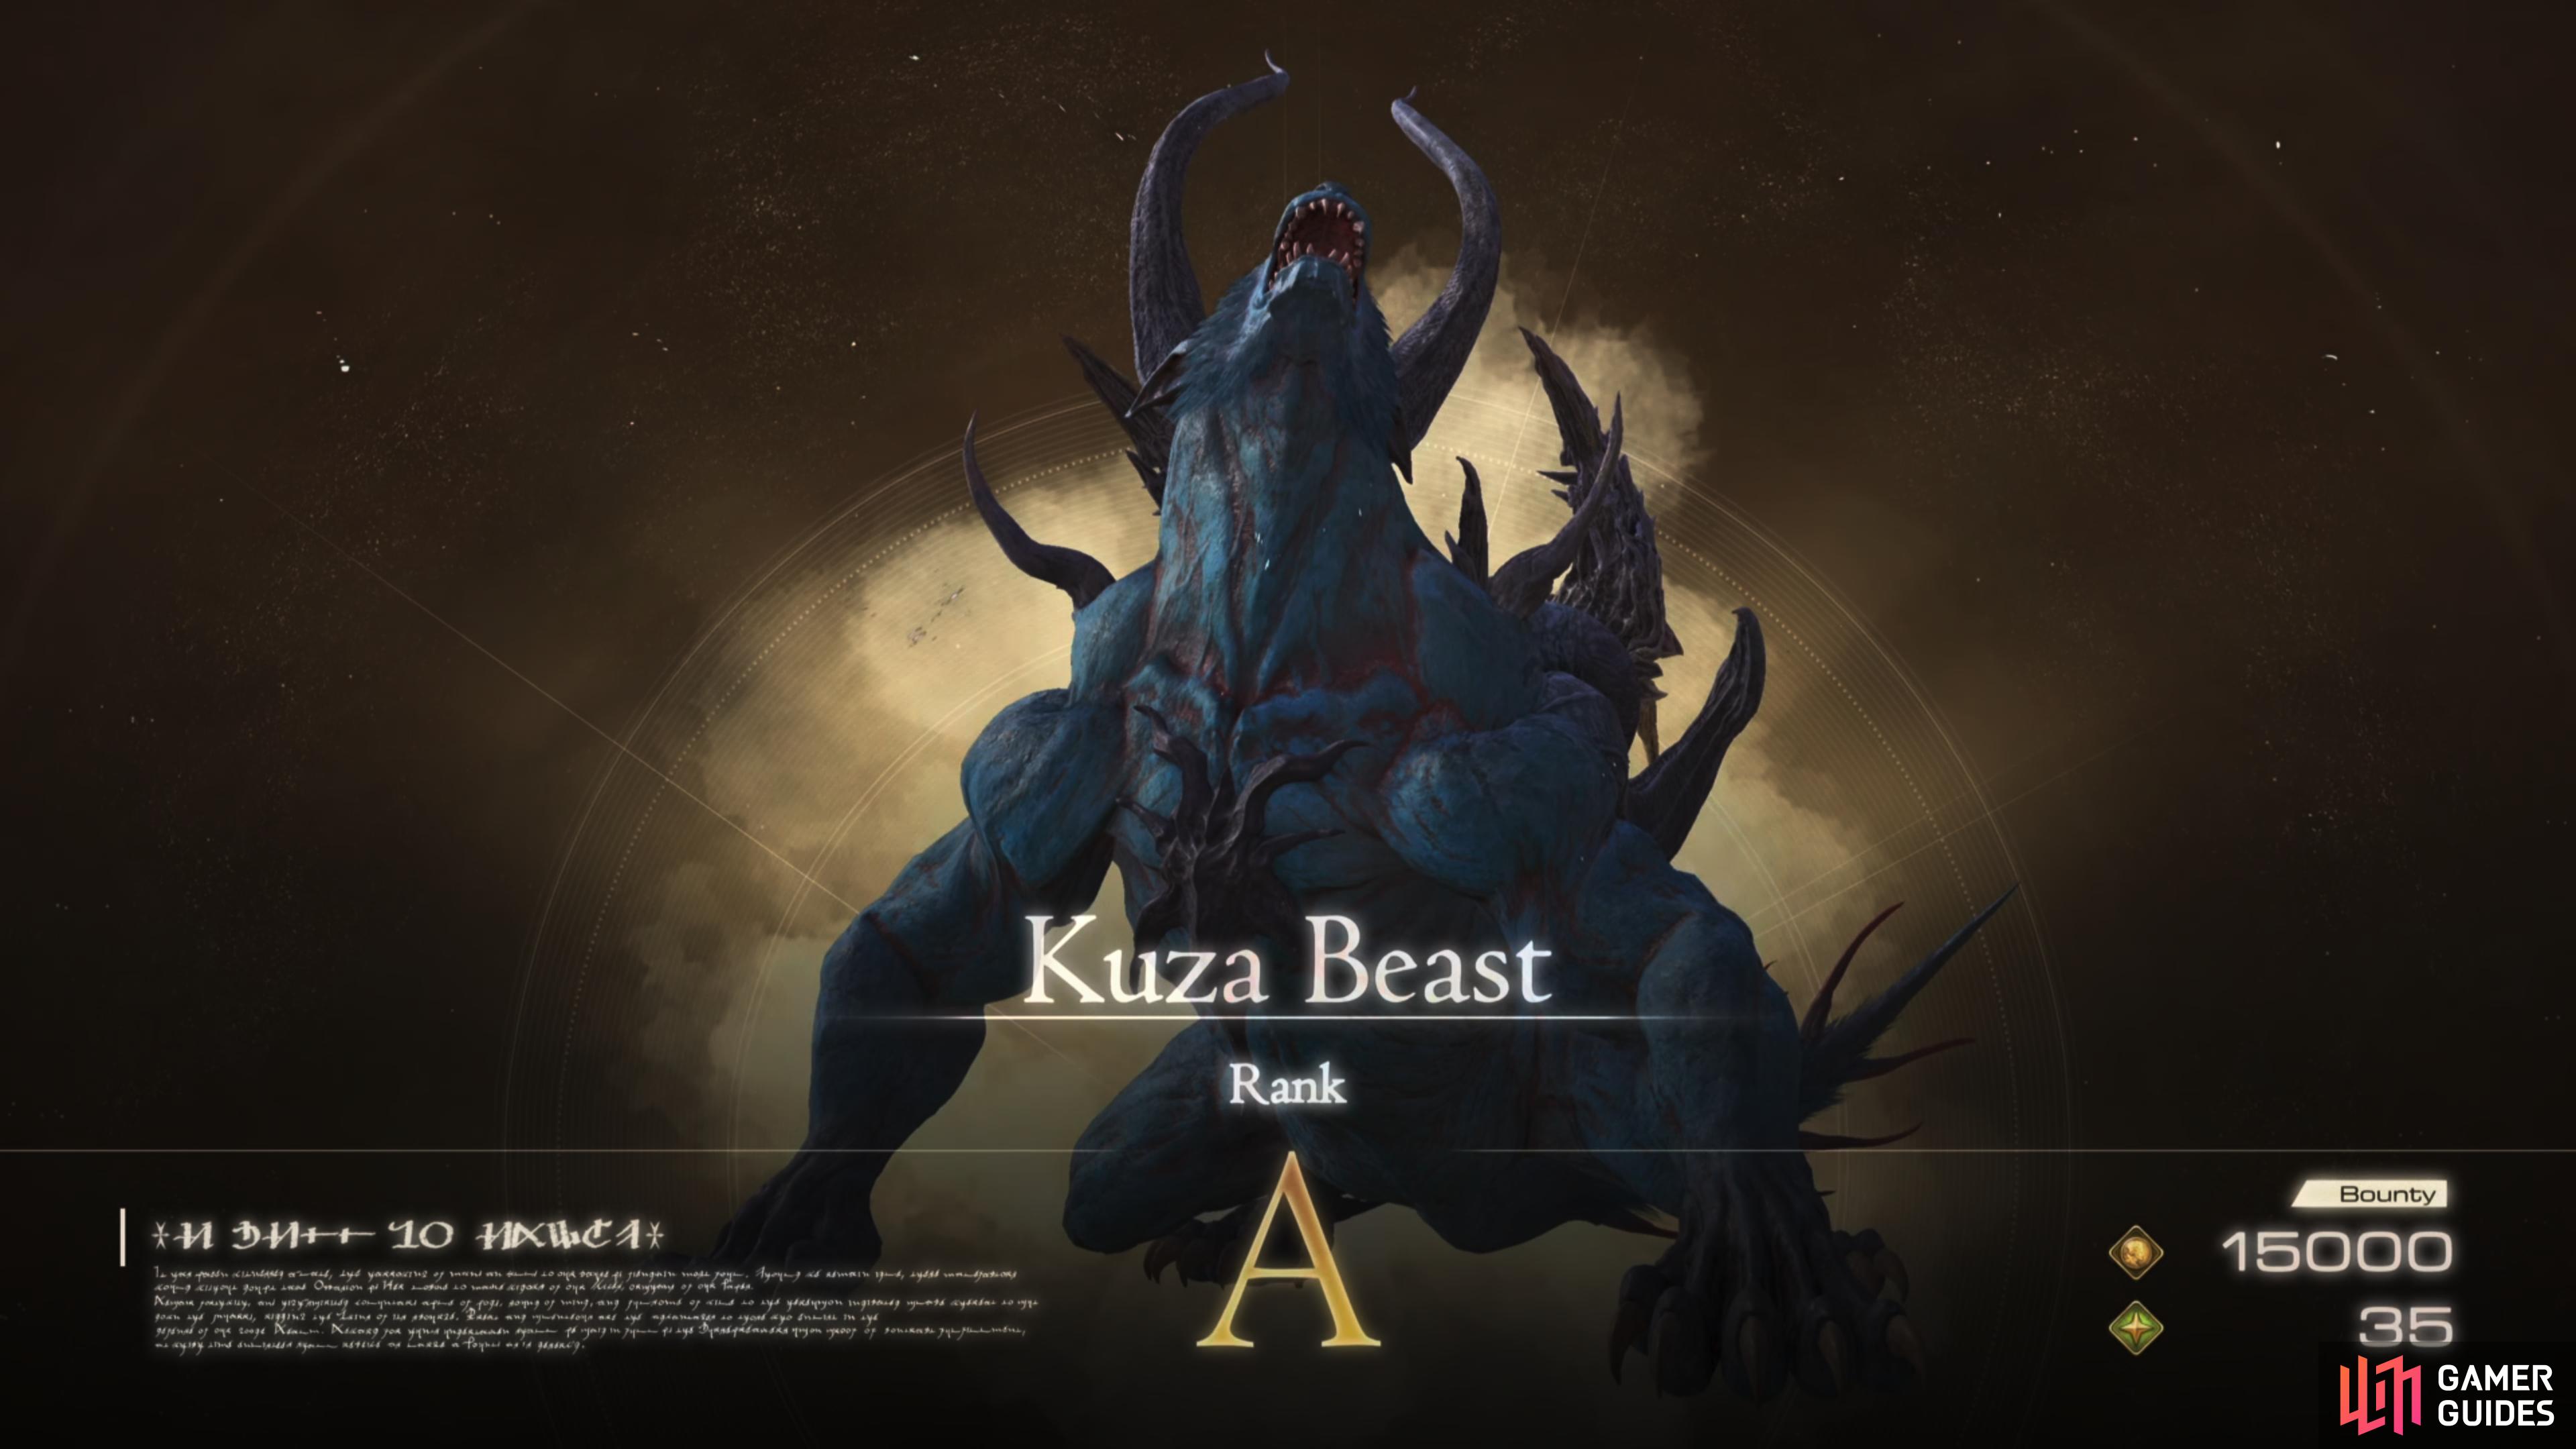 The Kuza Beast hunt is one of the last in the game.